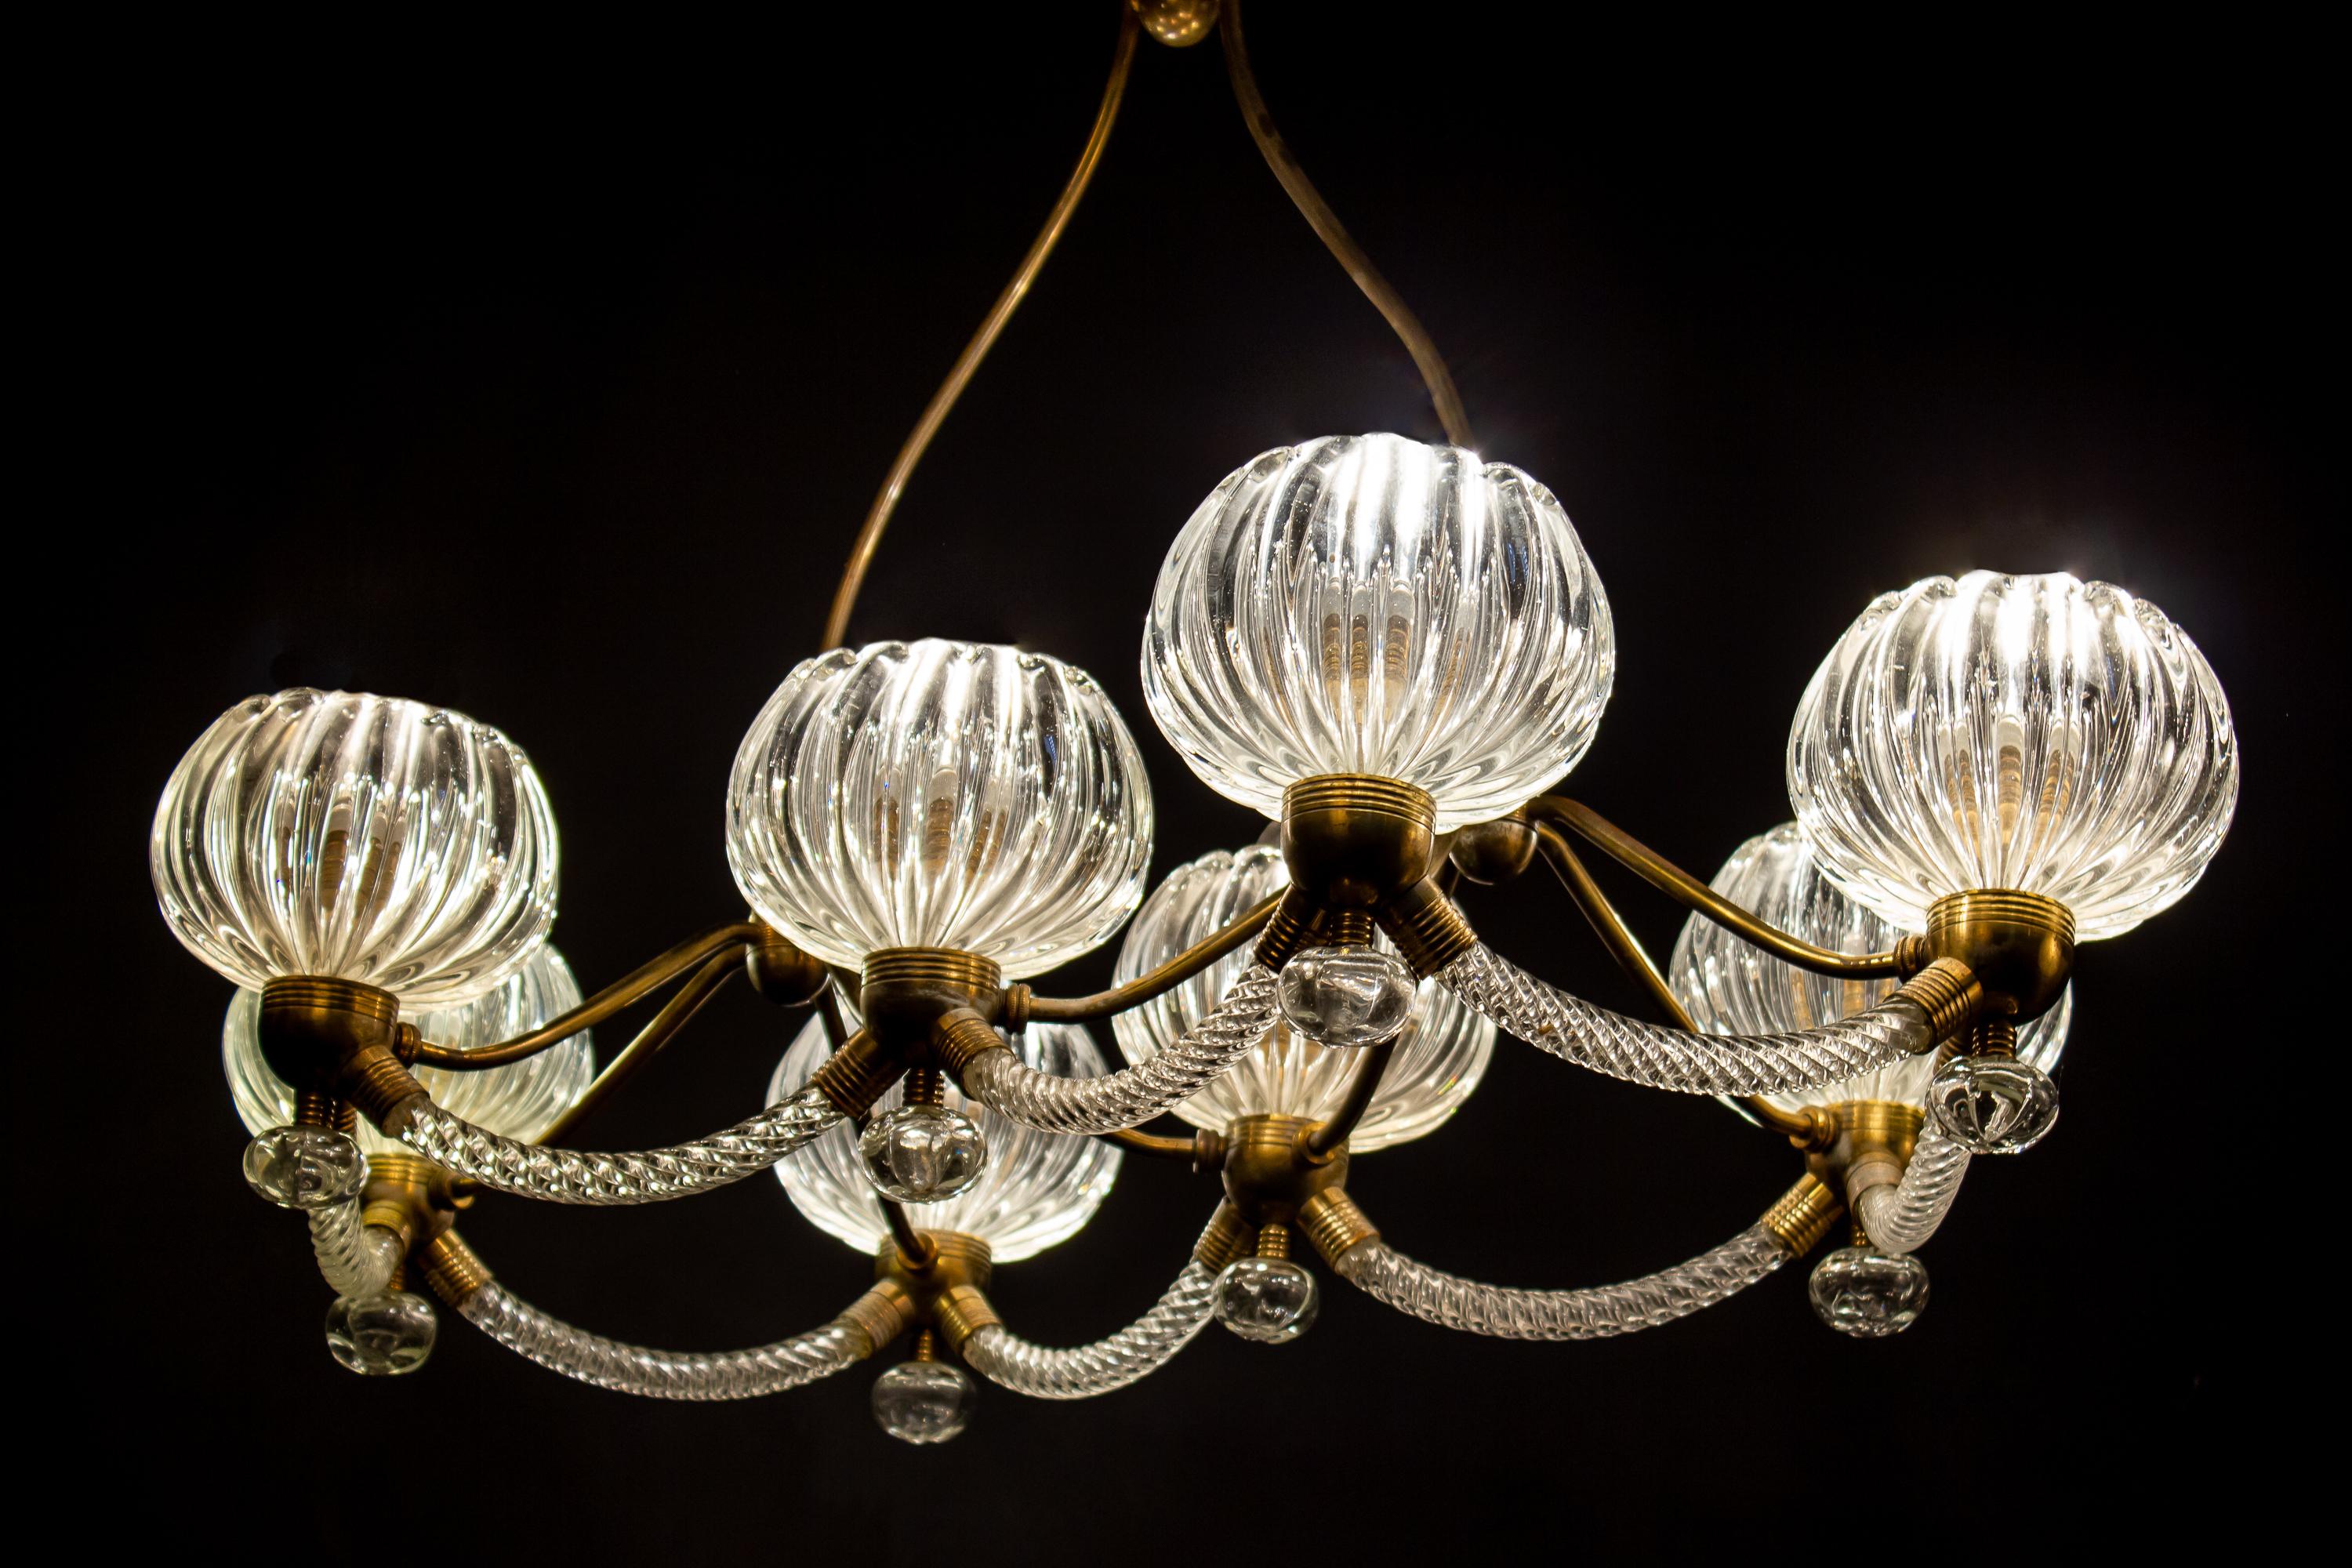 Sensational eight shade Murano glass chandelier with elegant shaped brass mount, by Ercole Barovier.
Excellent vintage condition.
Eight E 27 light bulbs compatible with US standards.